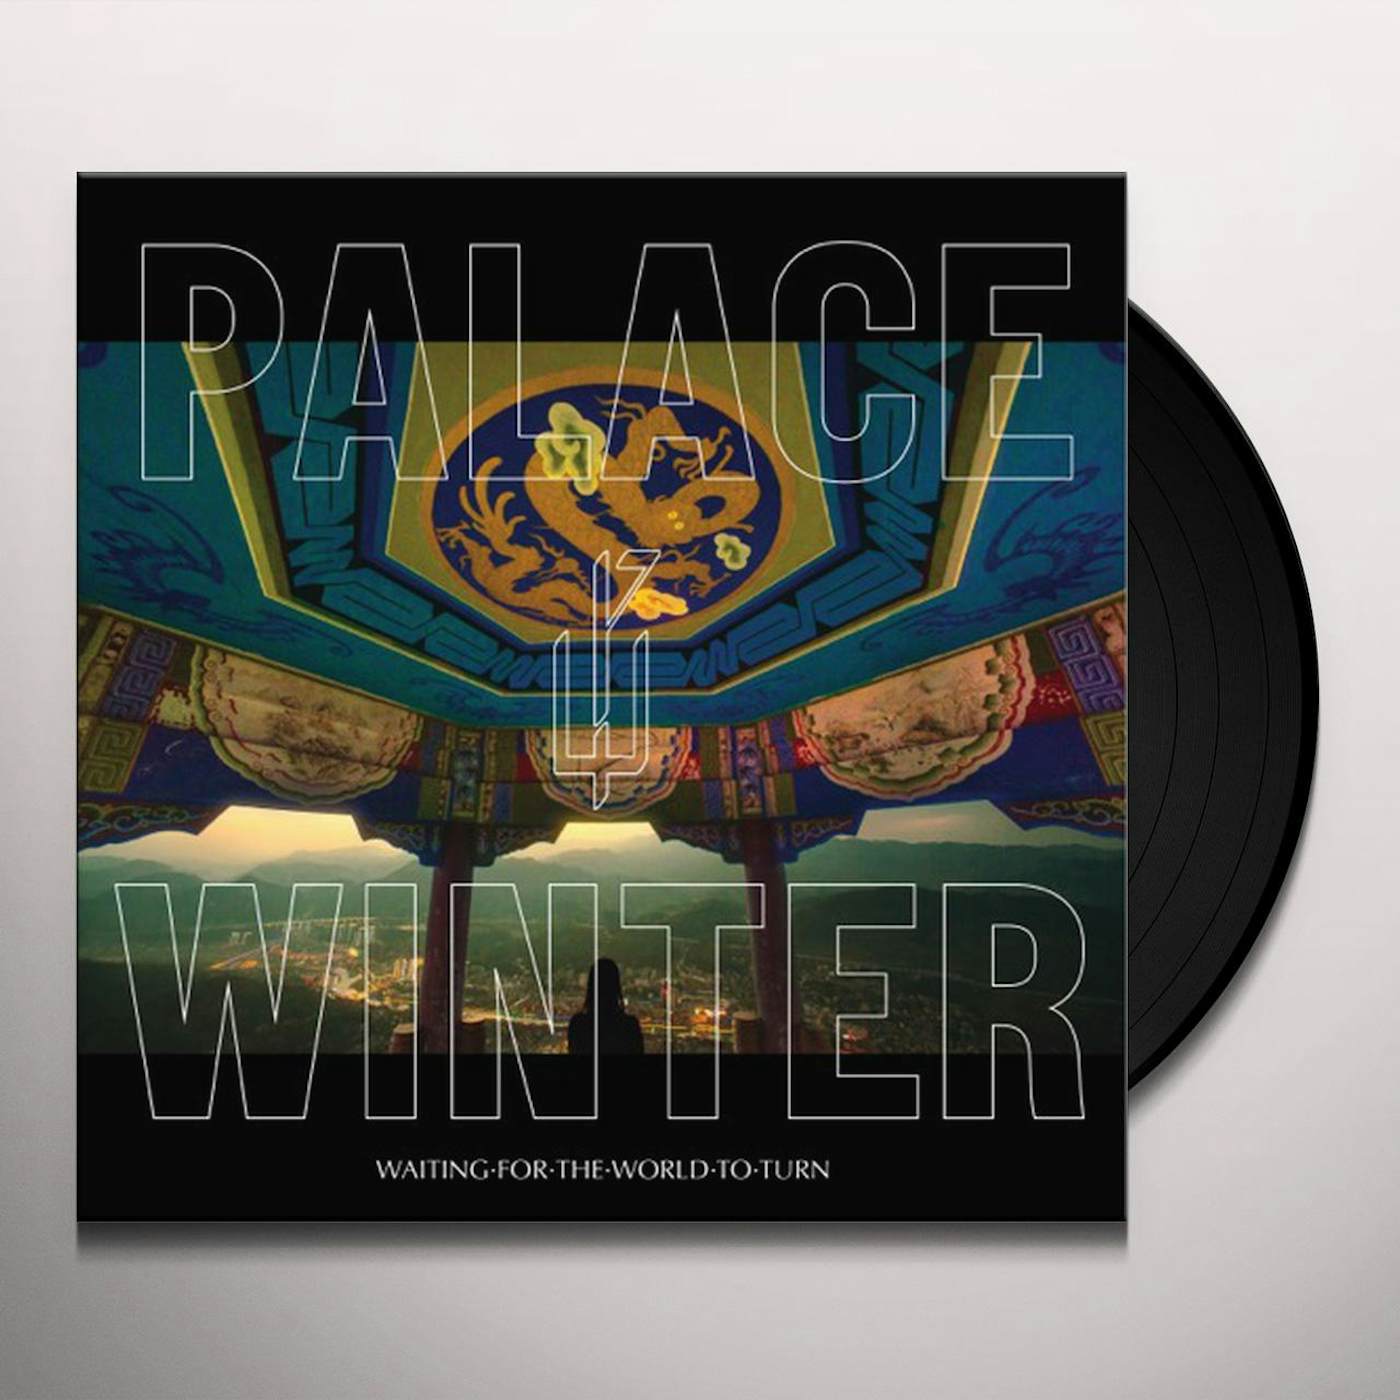 Palace Winter Waiting for the World to Turn Vinyl Record